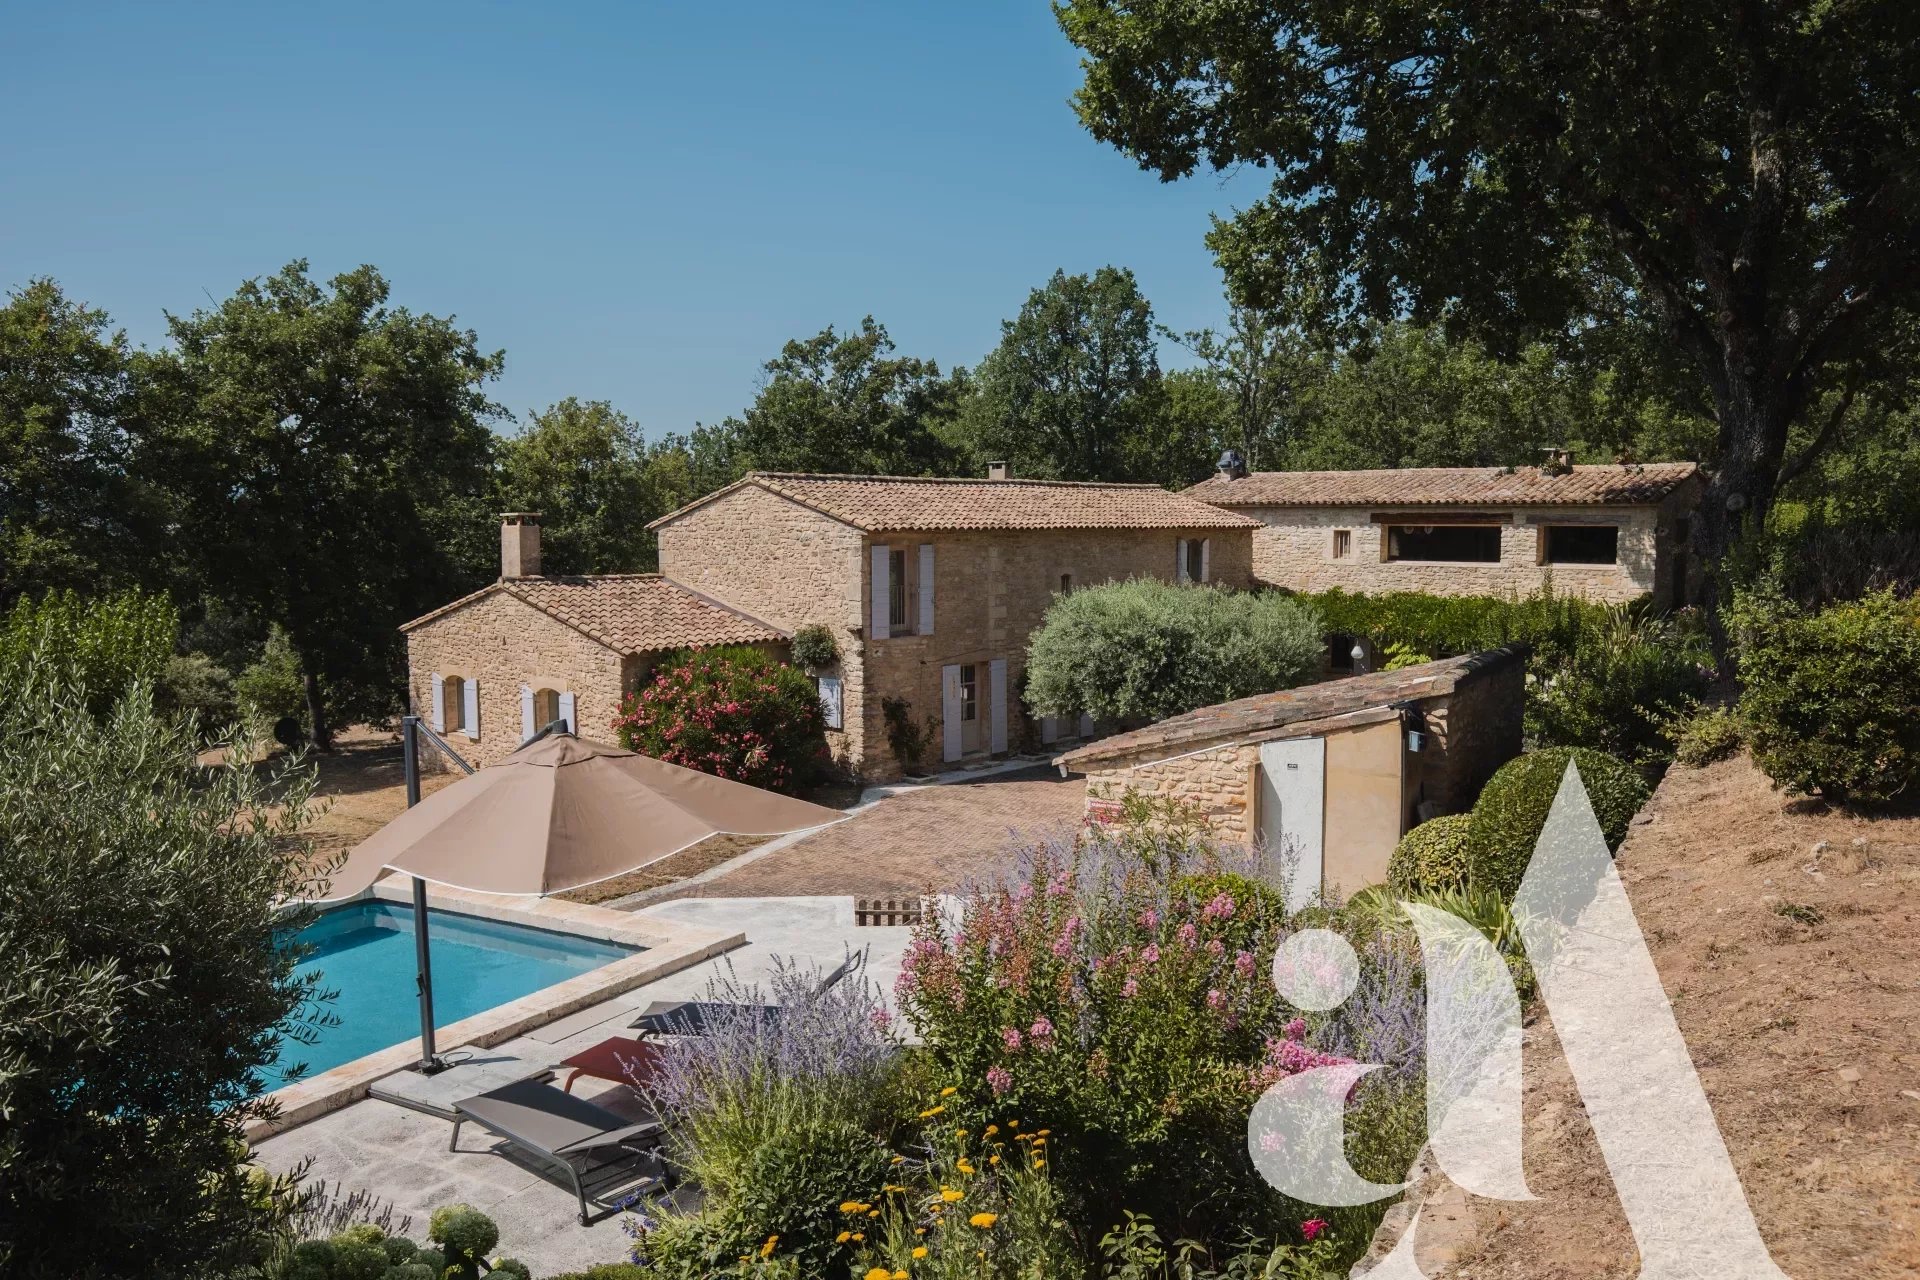 LACOSTE - STONE FARMHOUSE WITH SWIMMING POOL AND PANORAMIC VIEWS